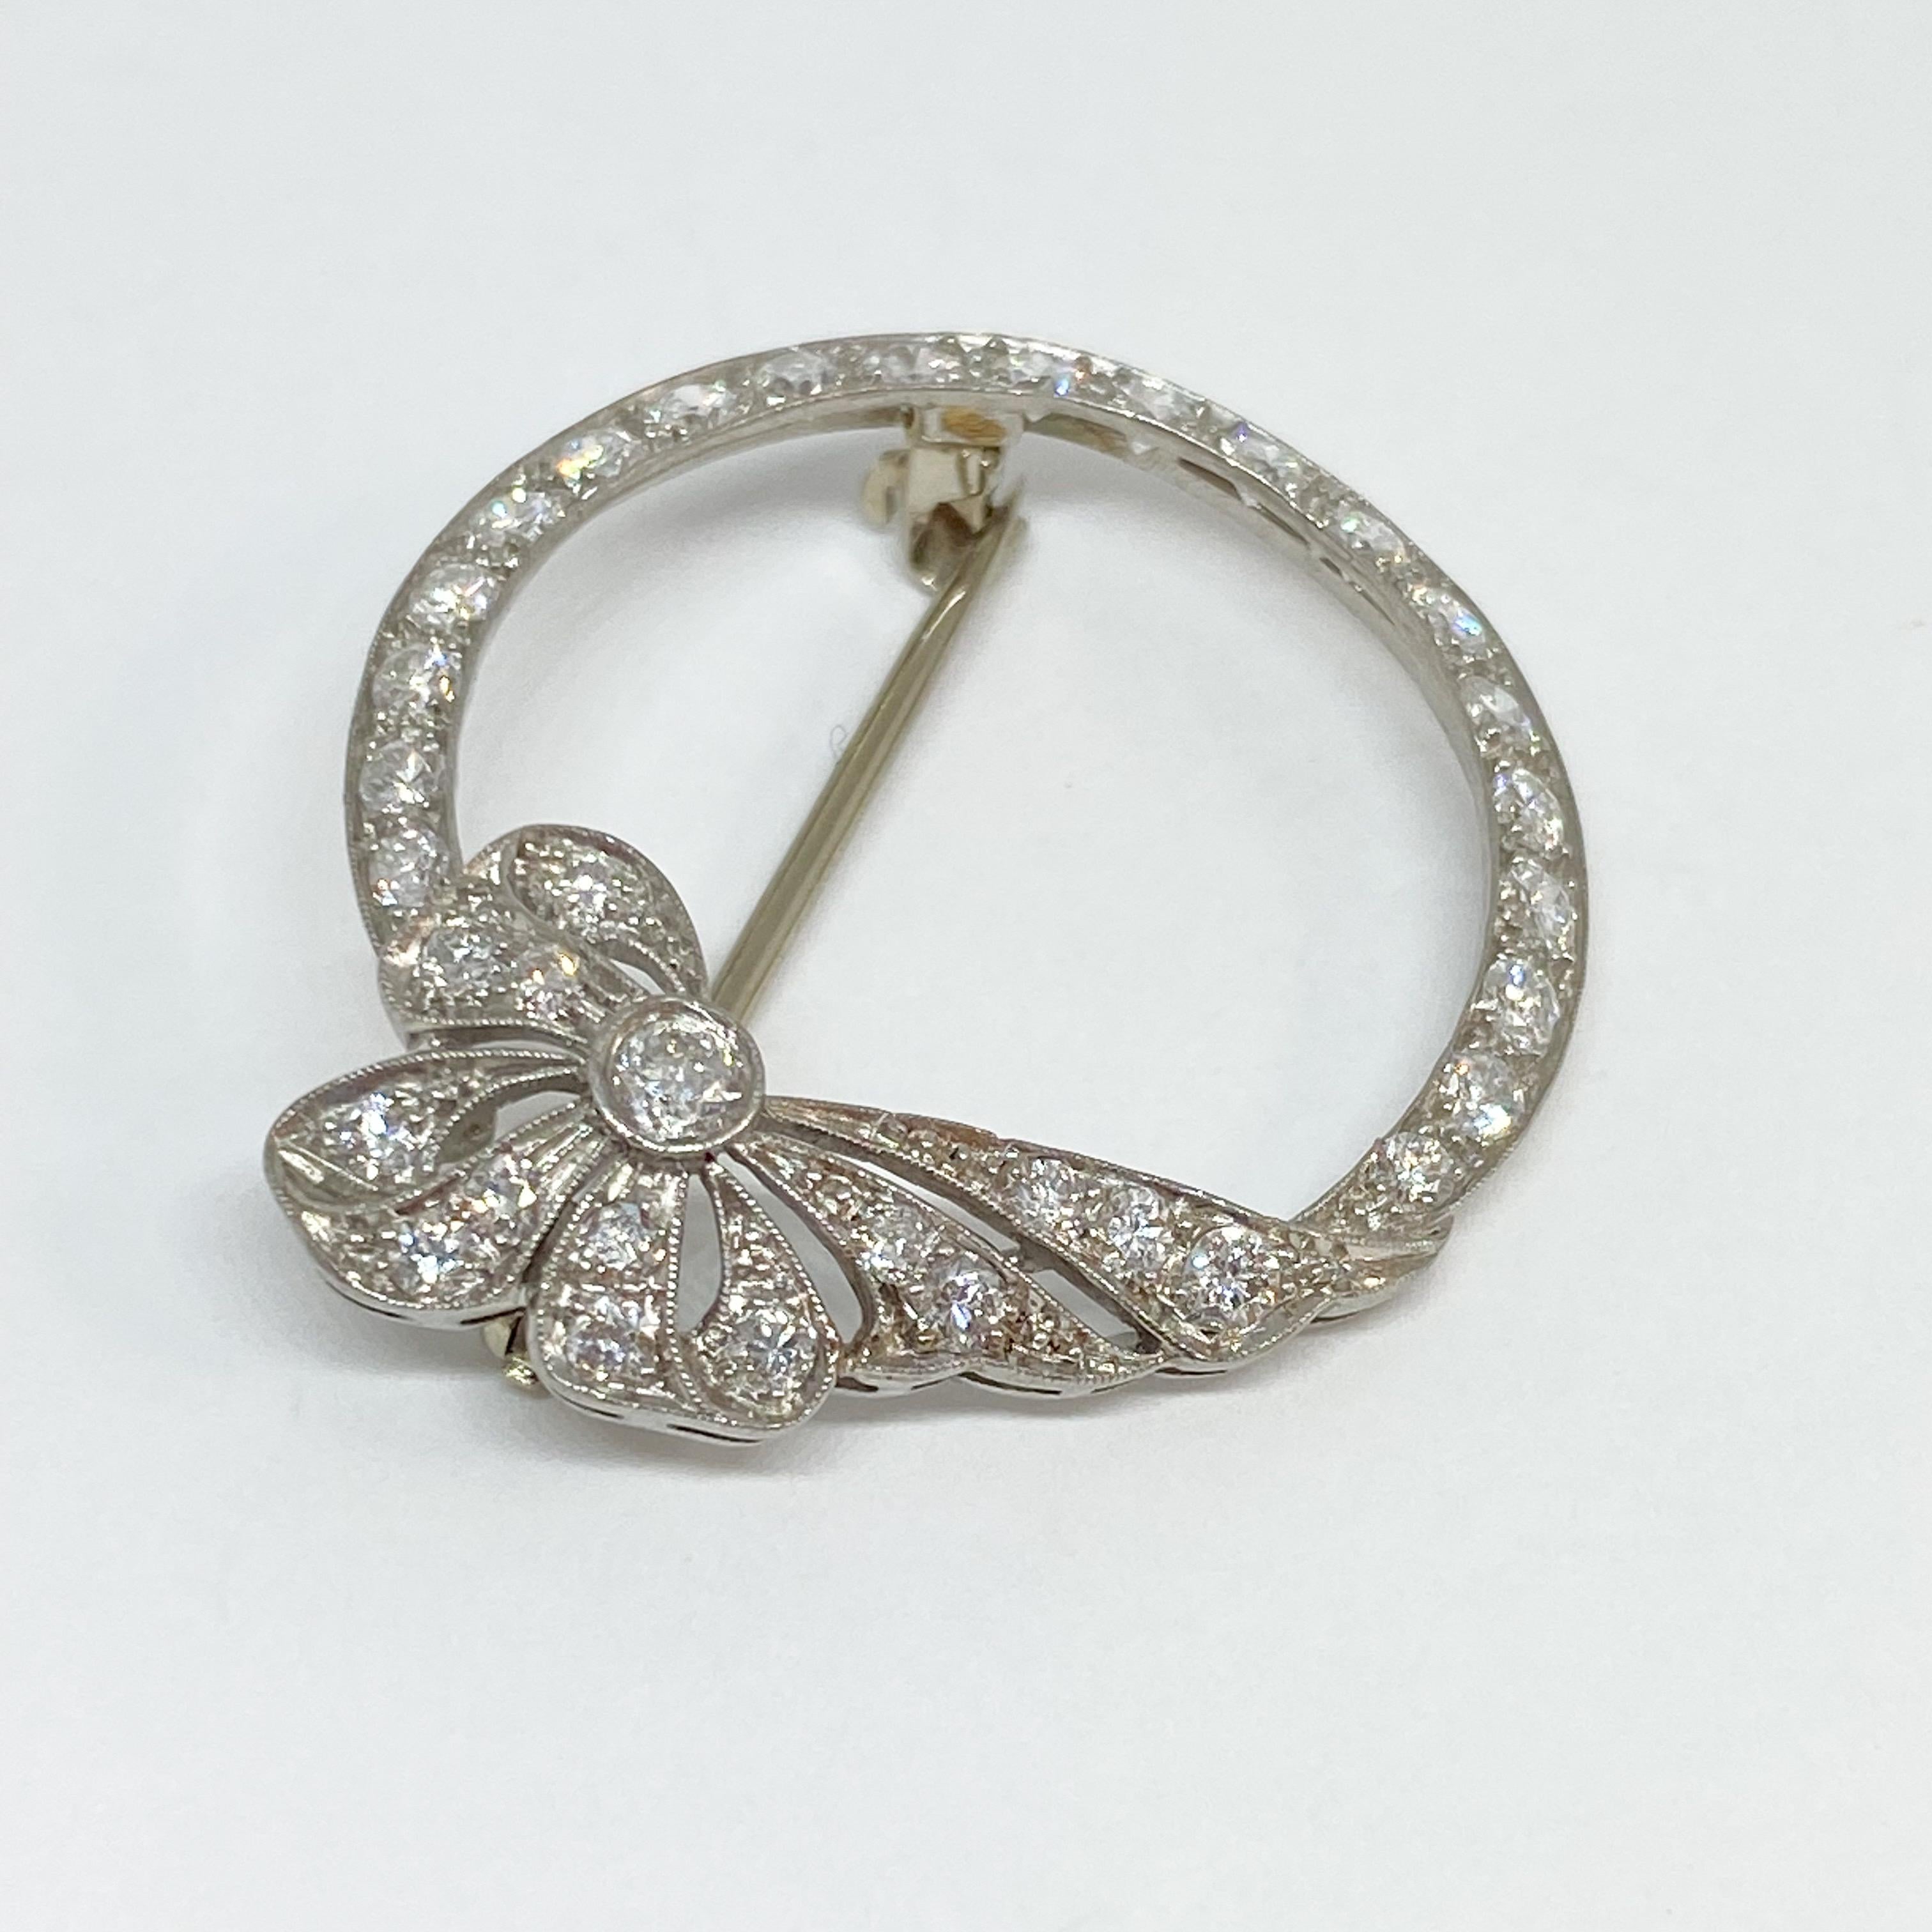 Vintage Art Deco brooch pin set with Old European cut and transitional cut diamonds. Designed in platinum with a ribbon circle motif, hinged pin brooch and catch. The diamonds have a combined total weight of 1.45 carats, G-H color, VS clarity. The